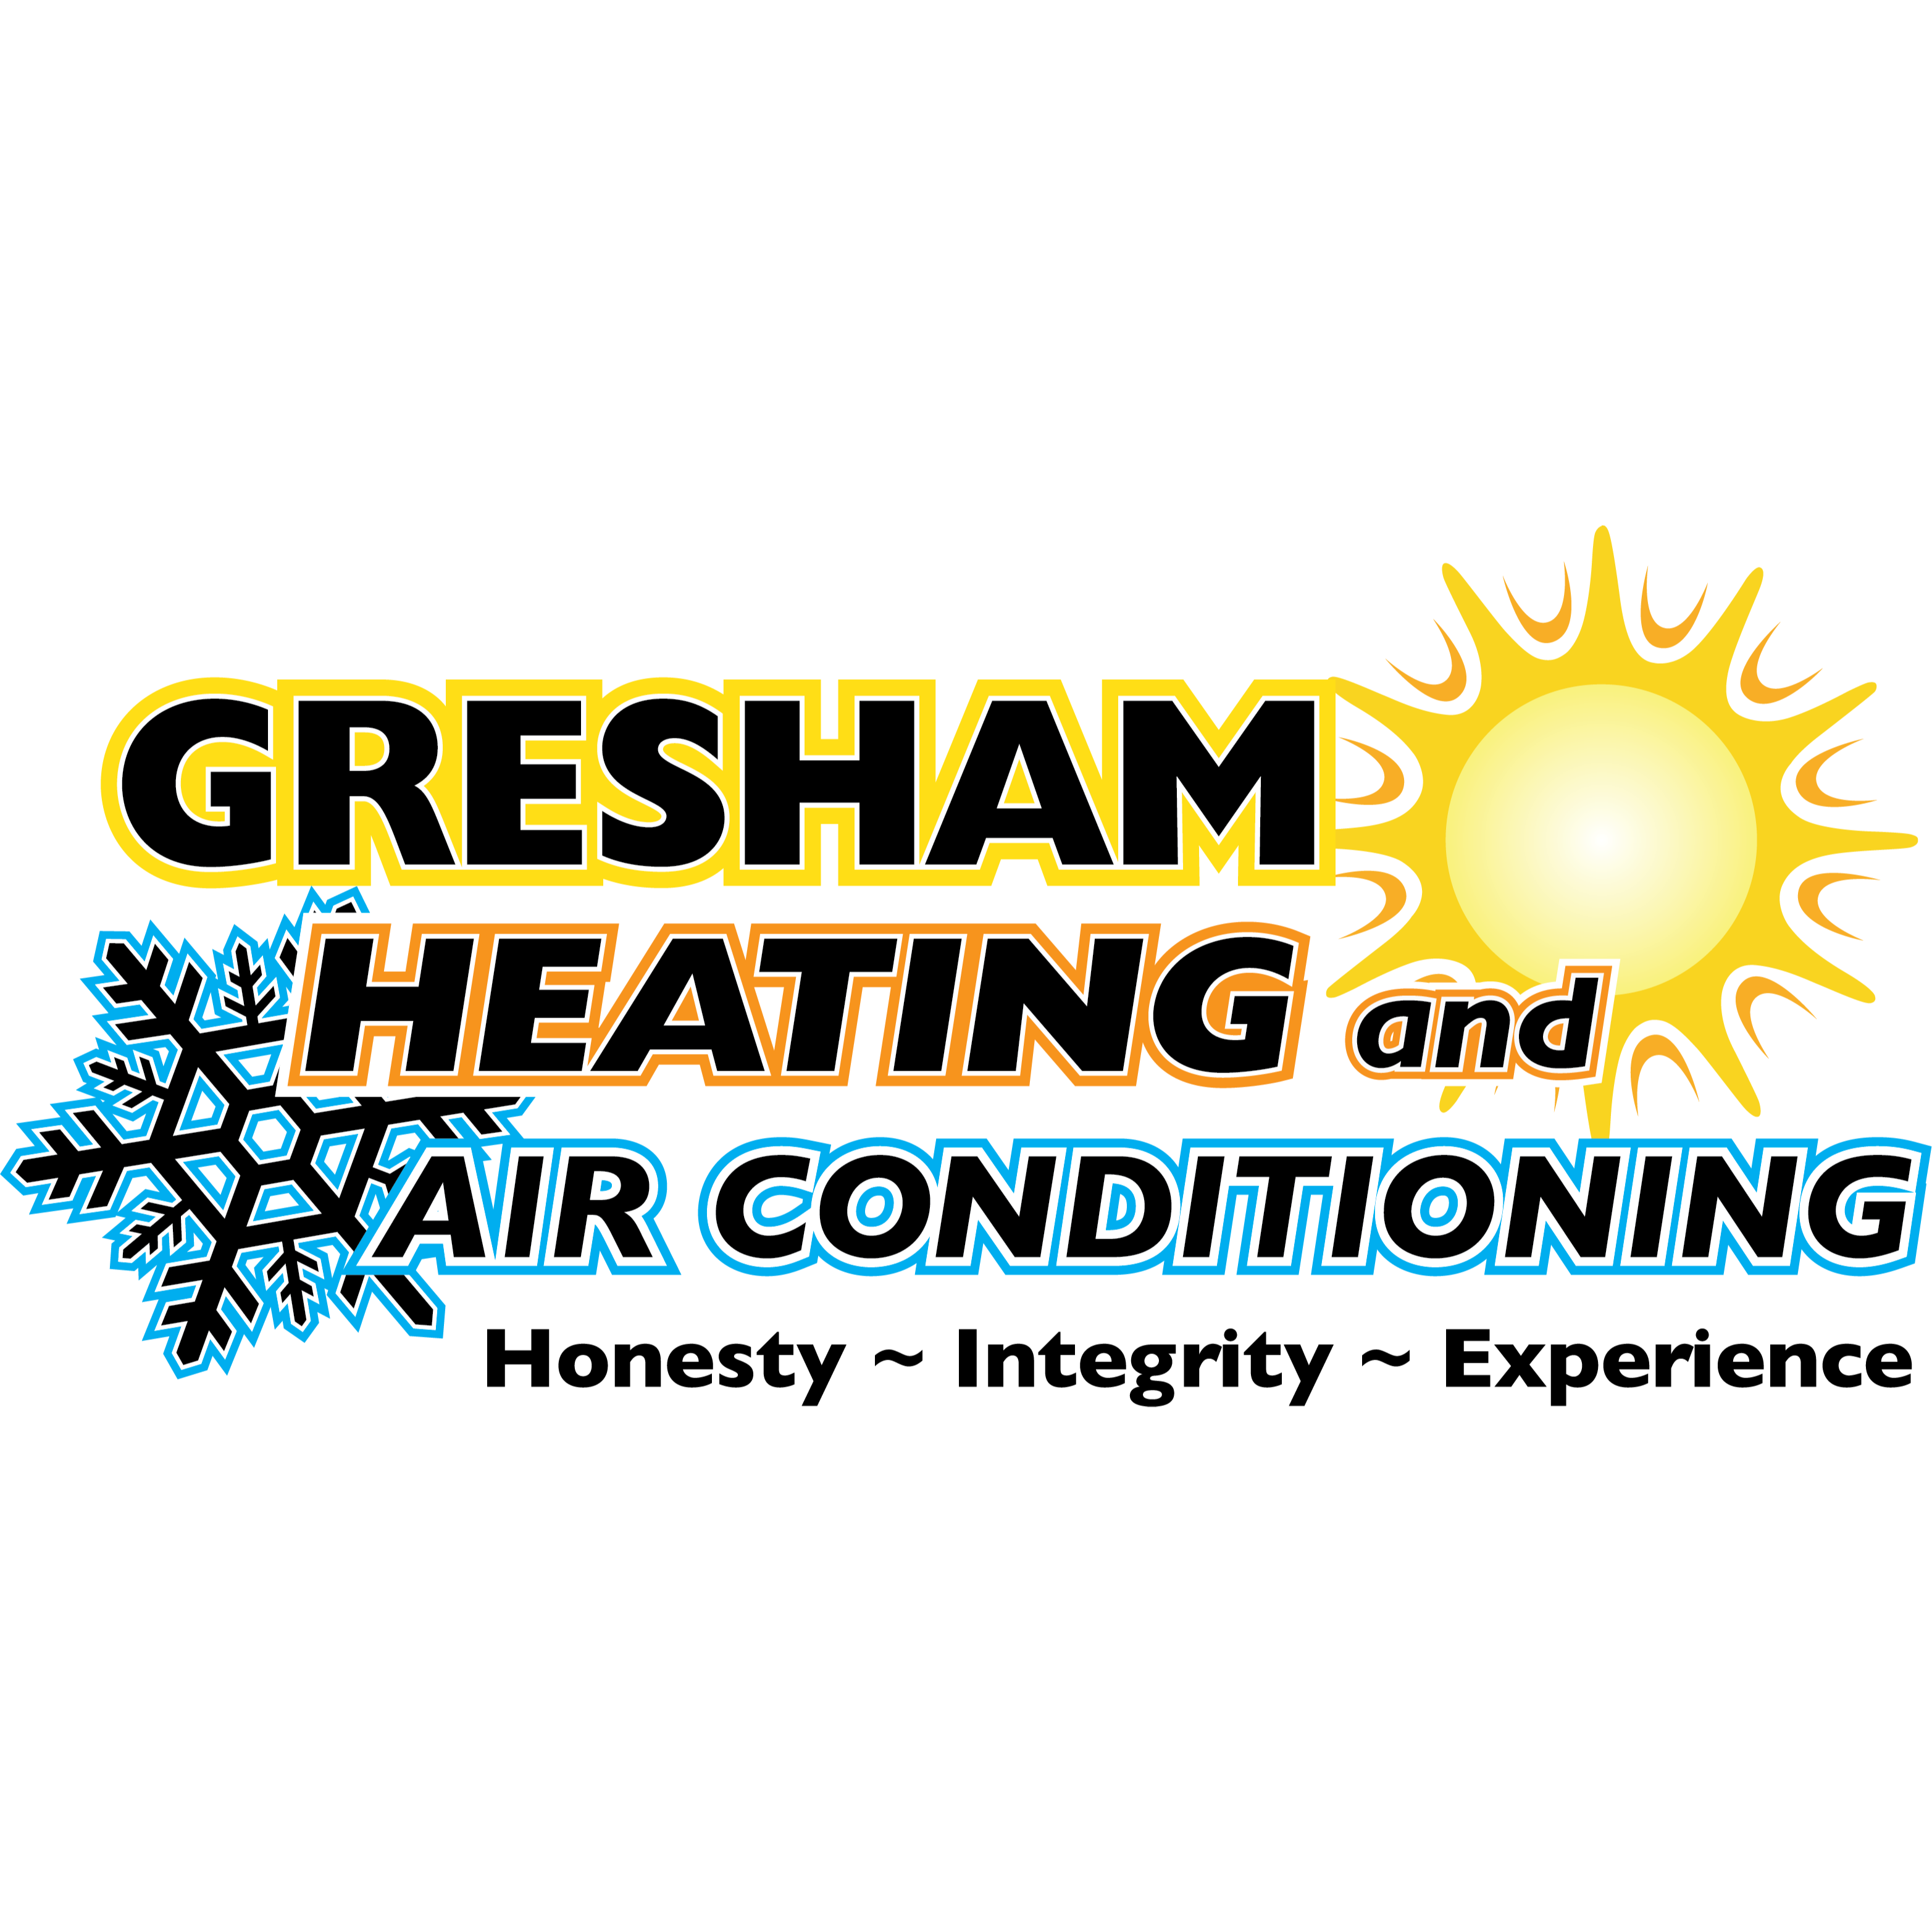 Gresham Heating and Air Conditioning Inc. - Wood Village, OR 97060 - (503)667-7594 | ShowMeLocal.com